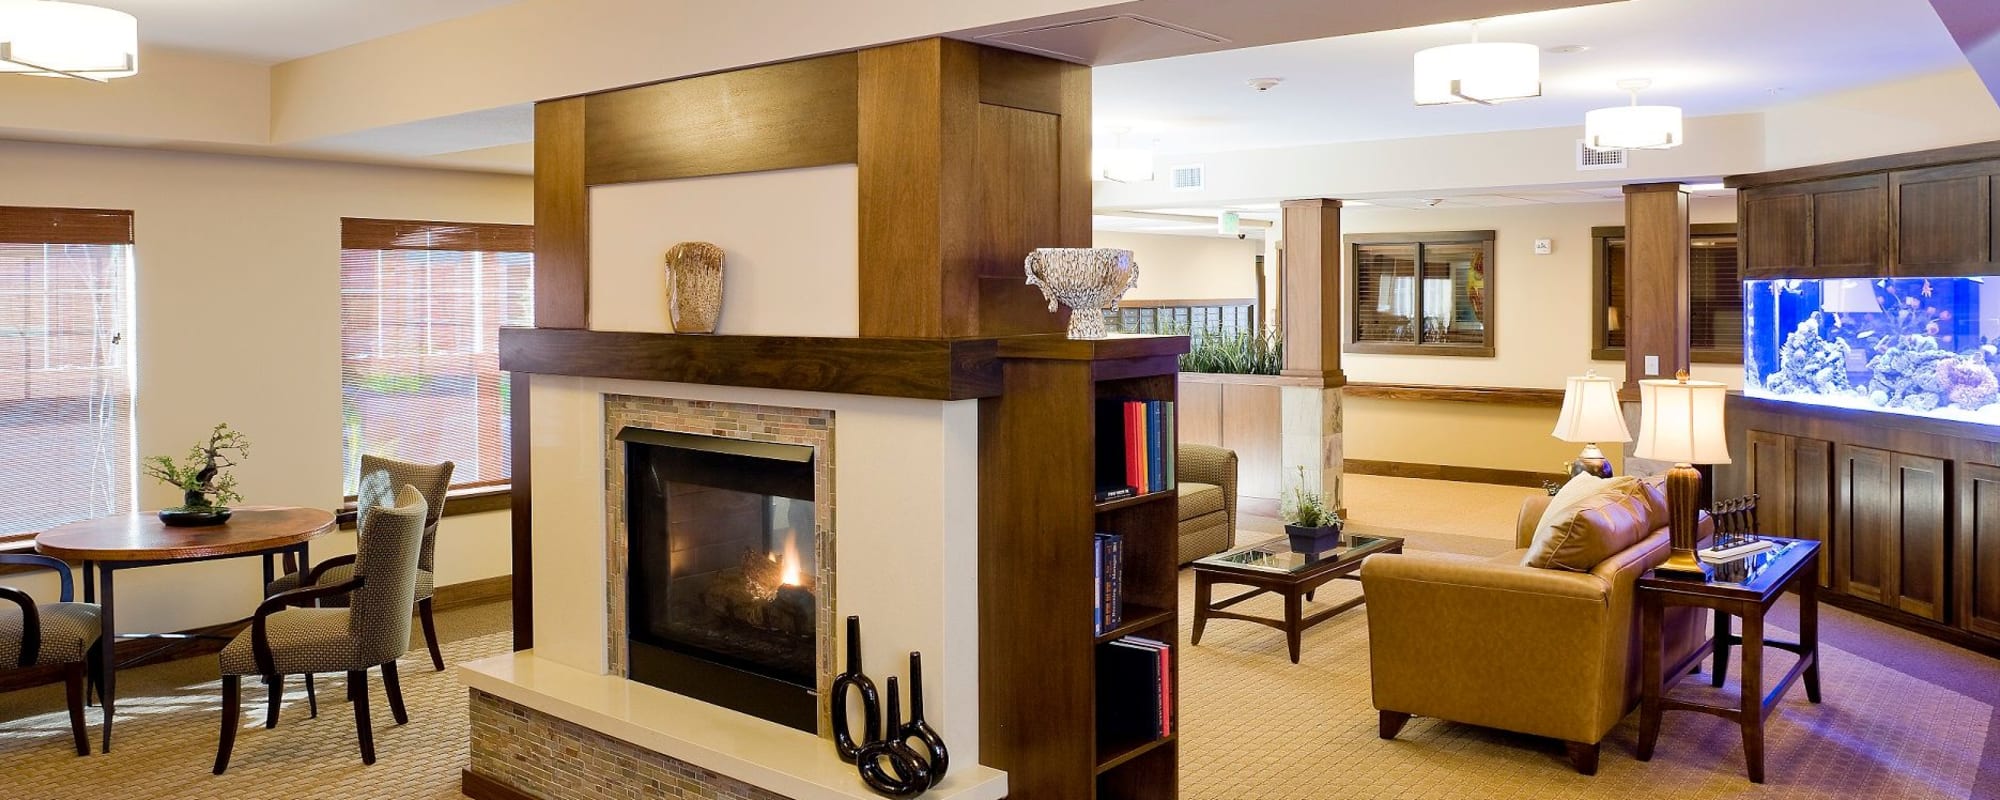 Comfortable lounge area with fireplace and aquarium at The Springs at Tanasbourne in Hillsboro, Oregon